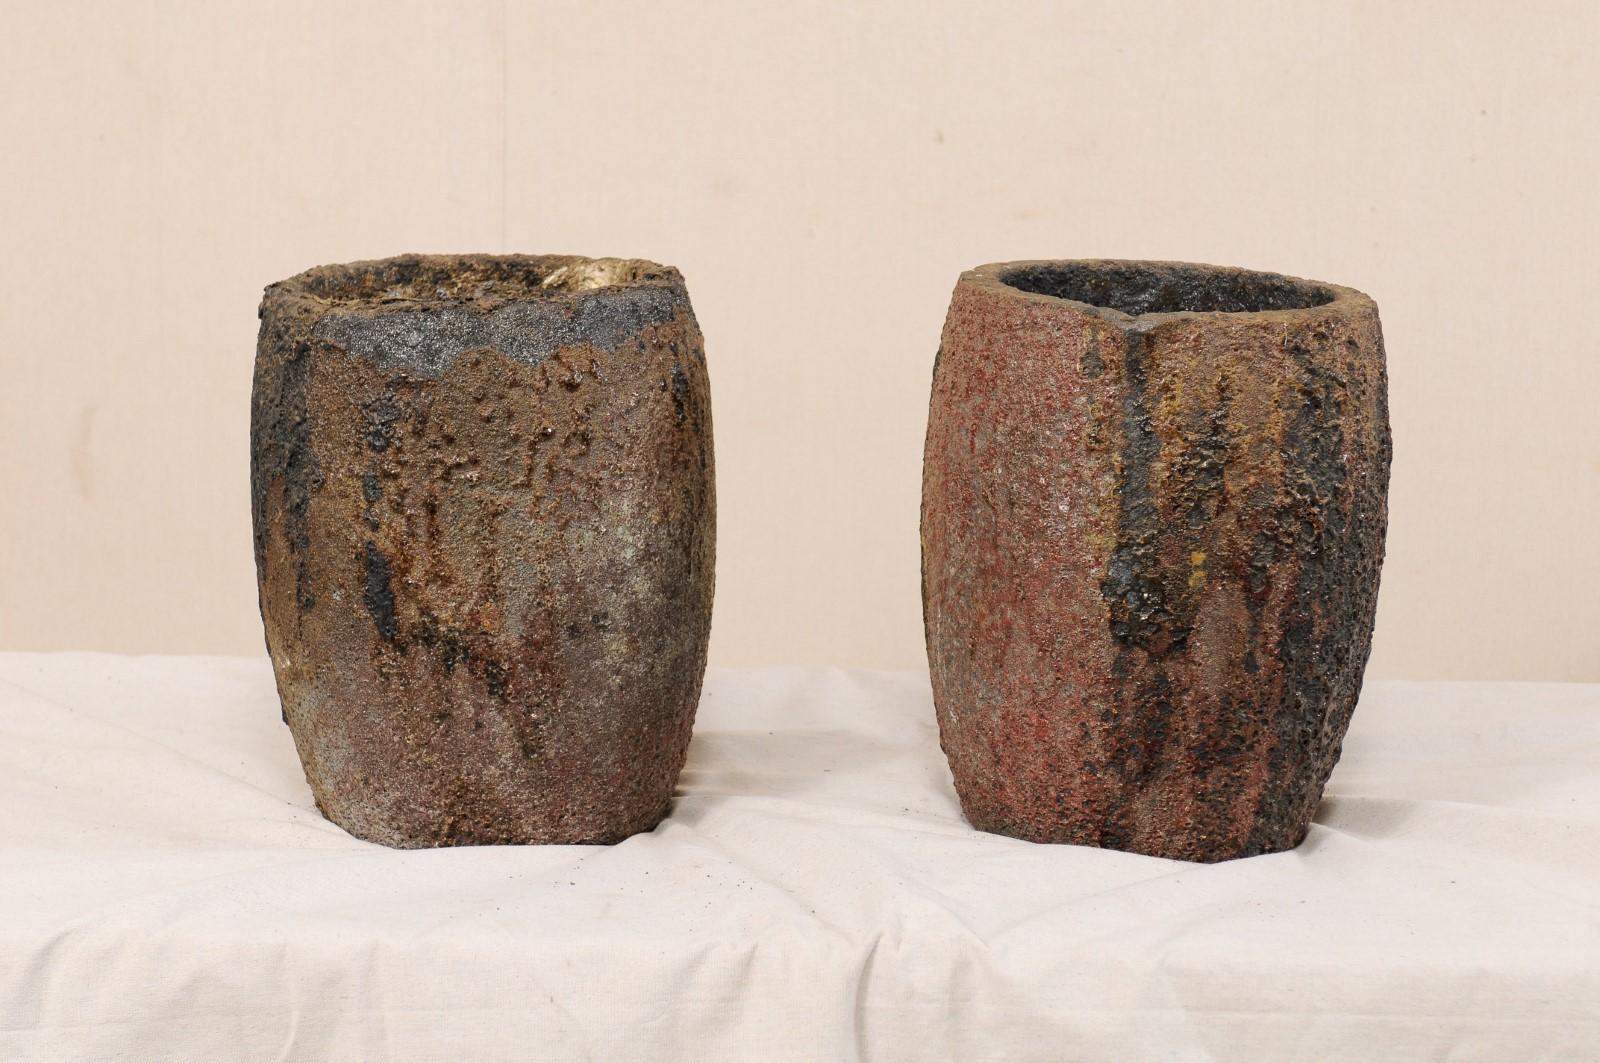 A pair of American industrial cauldrons or melting pots. This pair of vintage foundry pots, once used for extremely high temperature melting, have a wonderful, almost organic appearance with remnants of old materials clinging about the interior and